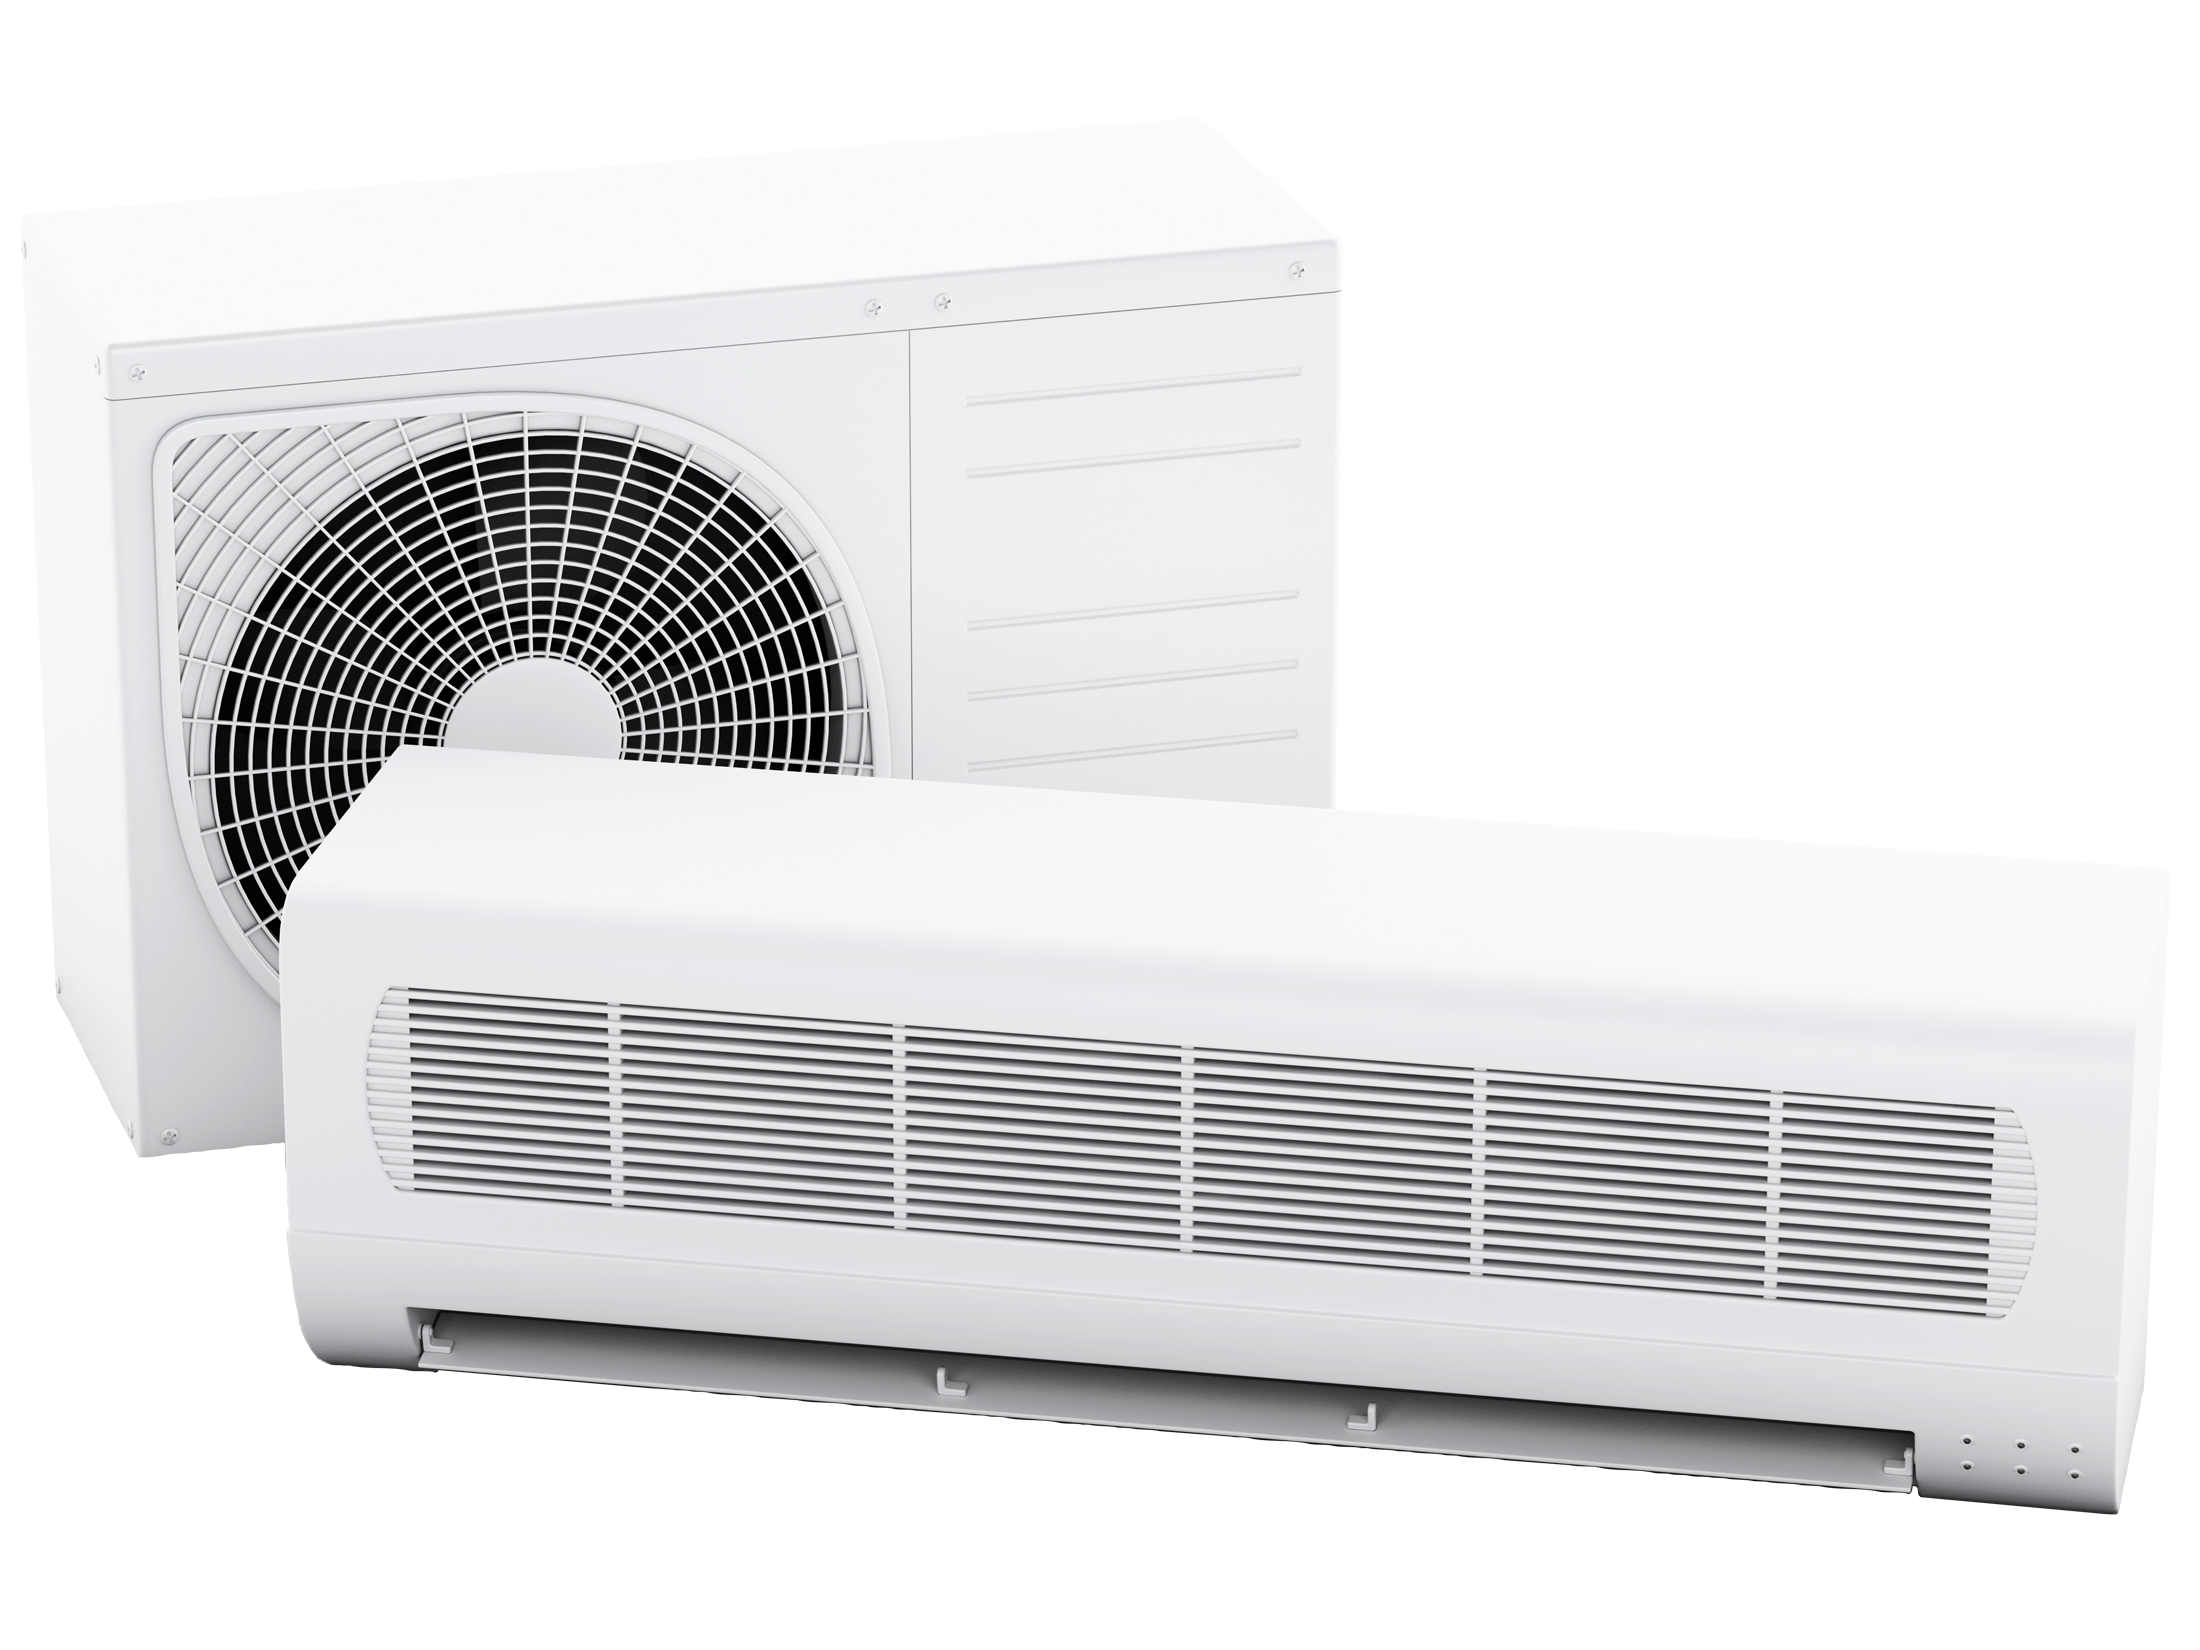 899-ductless-systemgettyimages-477734450.png